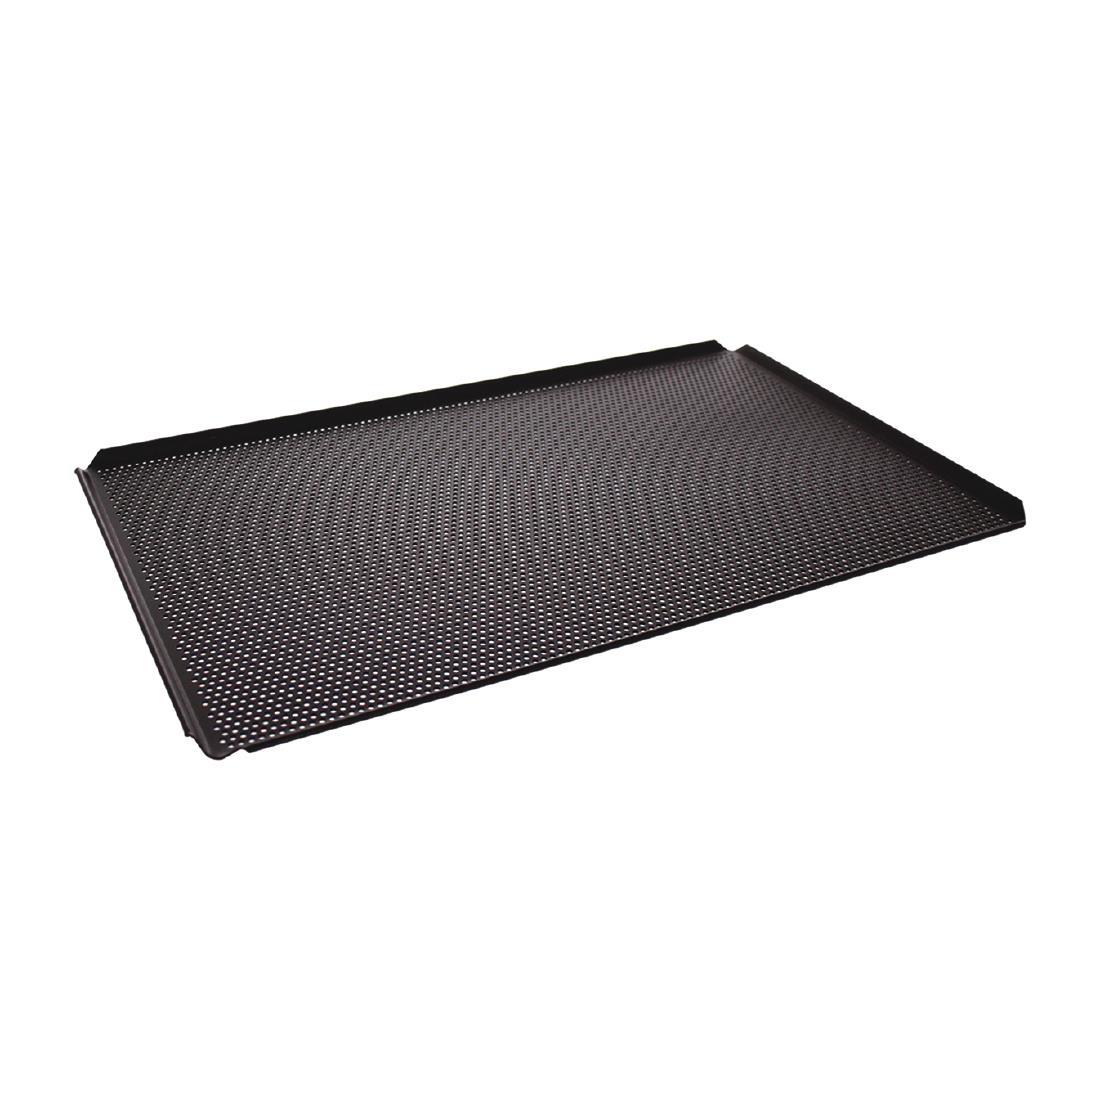 Schneider Tyneck Non-Stick Perforated Baking Tray 530 x 325mm - DW284  - 1